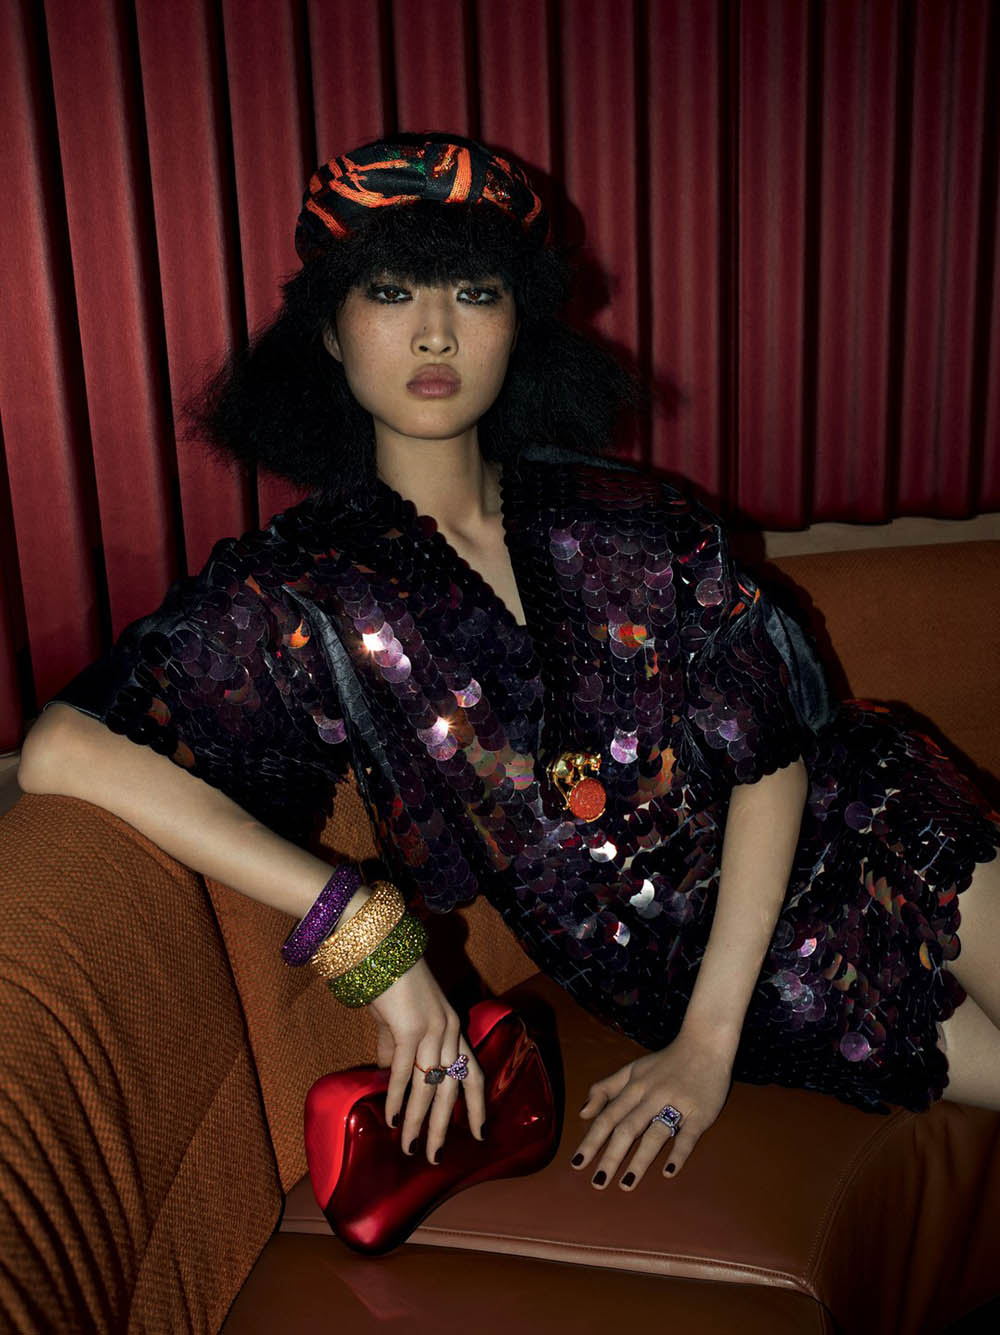 Jing Wen by Mert & Marcus for British Vogue March 2018